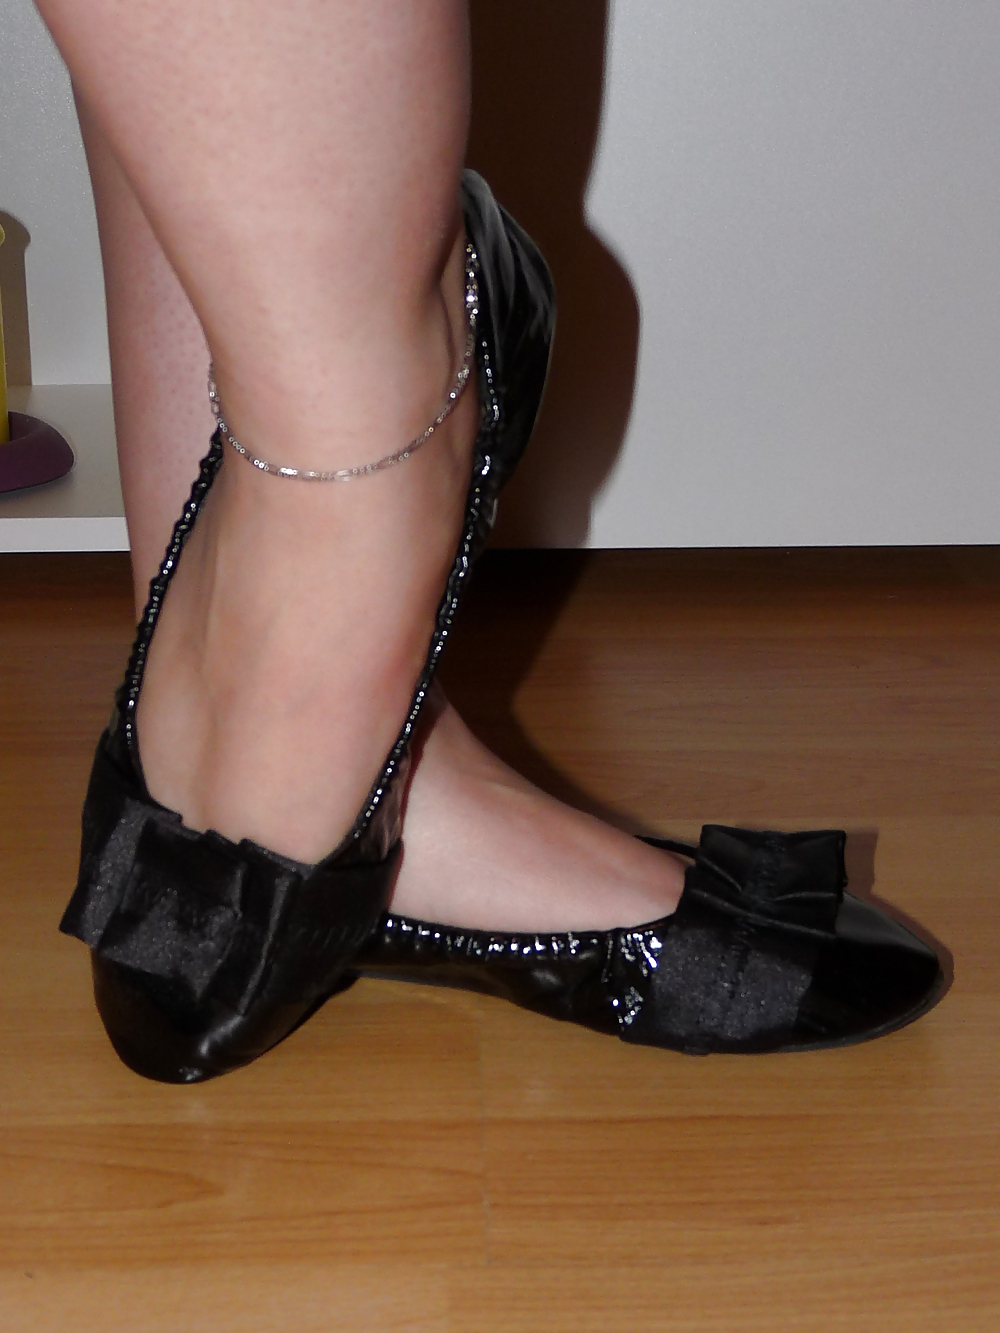 Wifes sexy black leather ballerina ballet flats shoes  #37860582